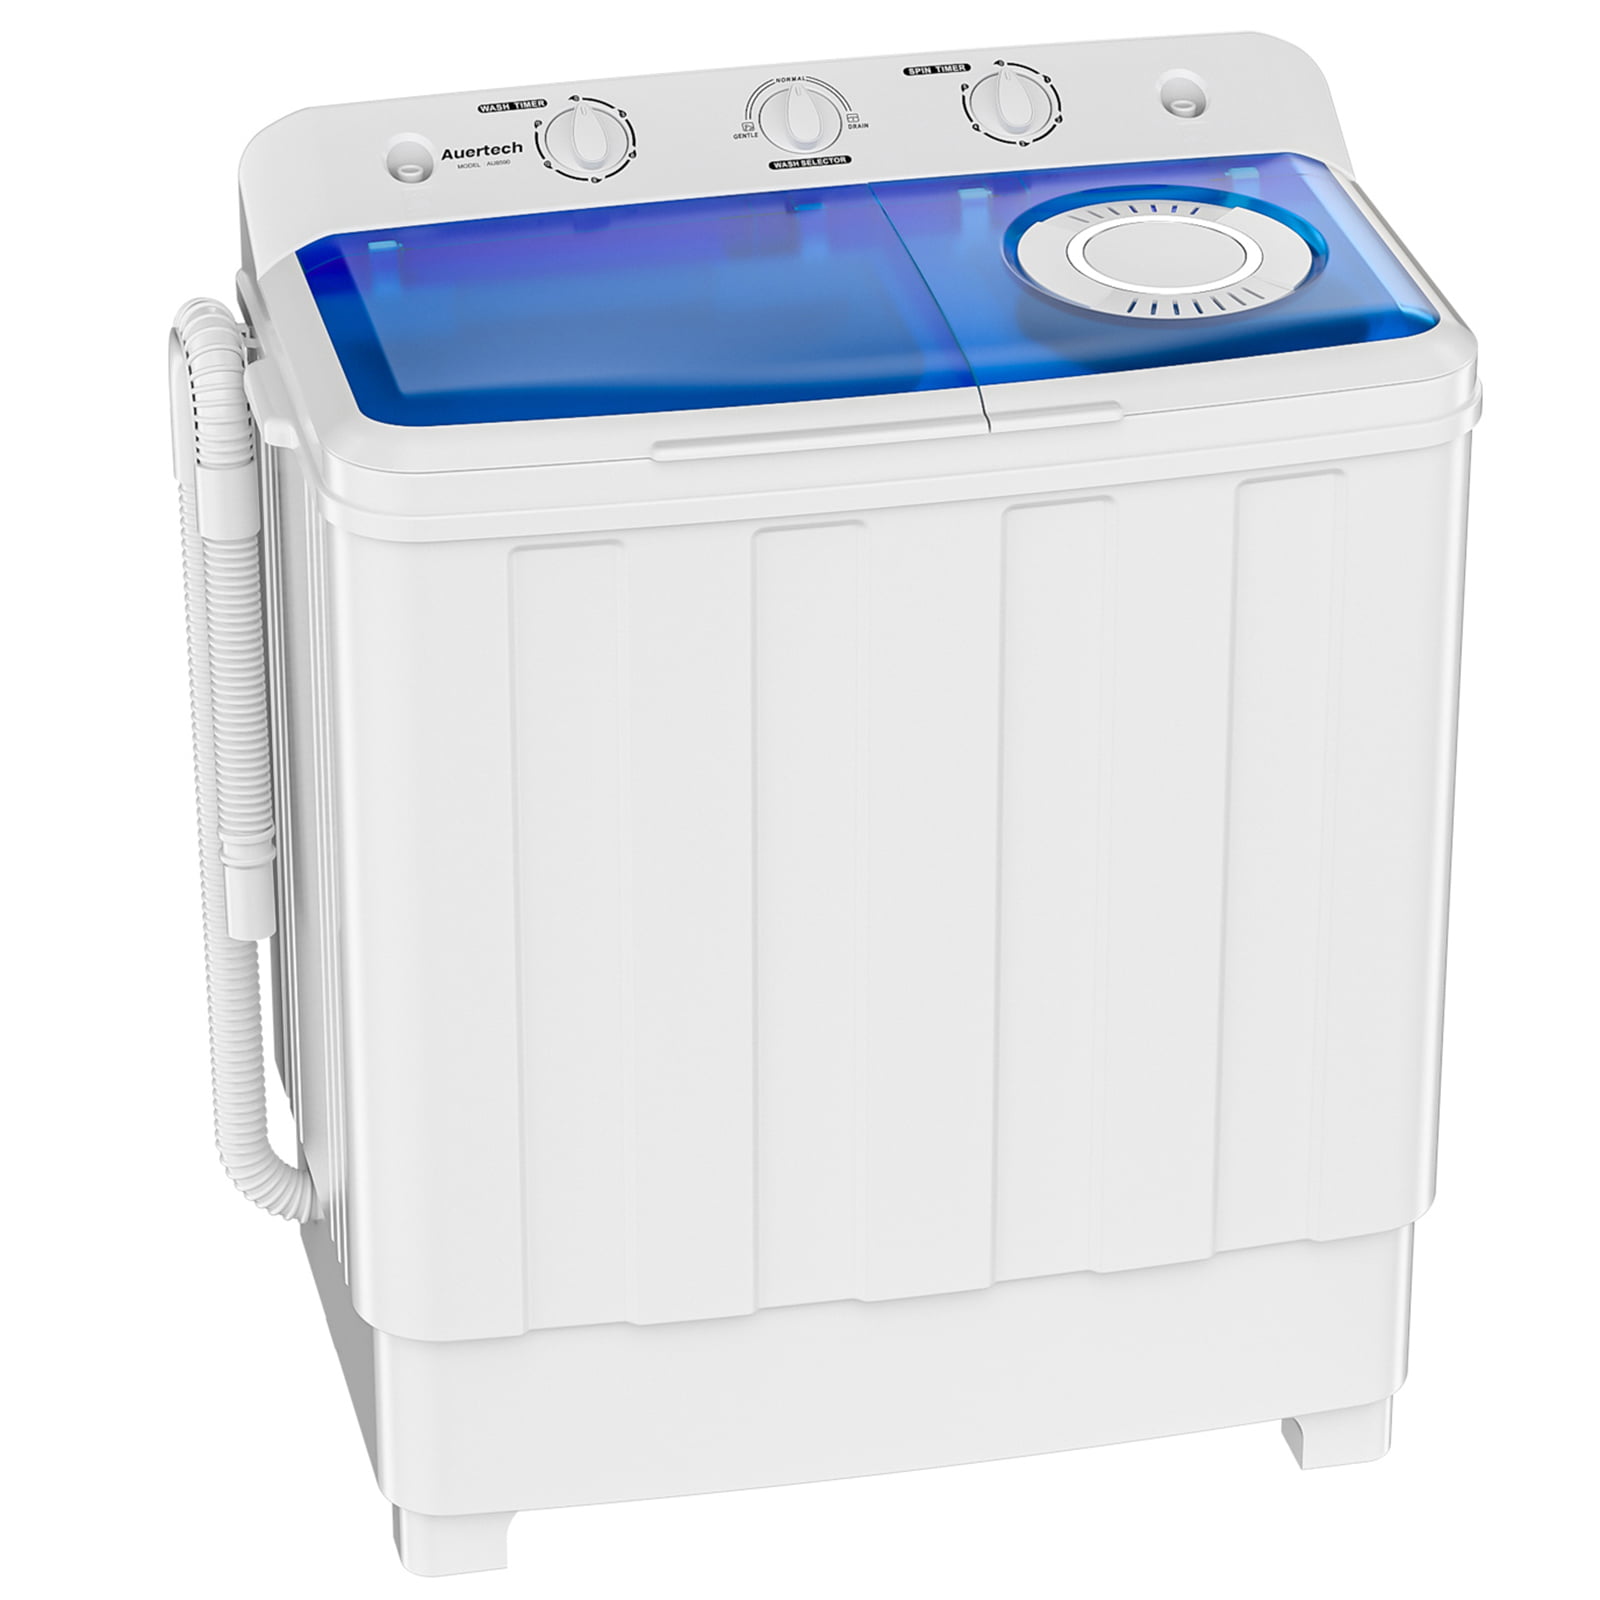 ft Laundry Washer Spin with Long Hose for Apartments Camping Washing Machine with 8.8 lbs Capacity Blue 2-IN-1 Portable Washer and Dryer for Compact Laundry EROMMY Portable Washing Machine 